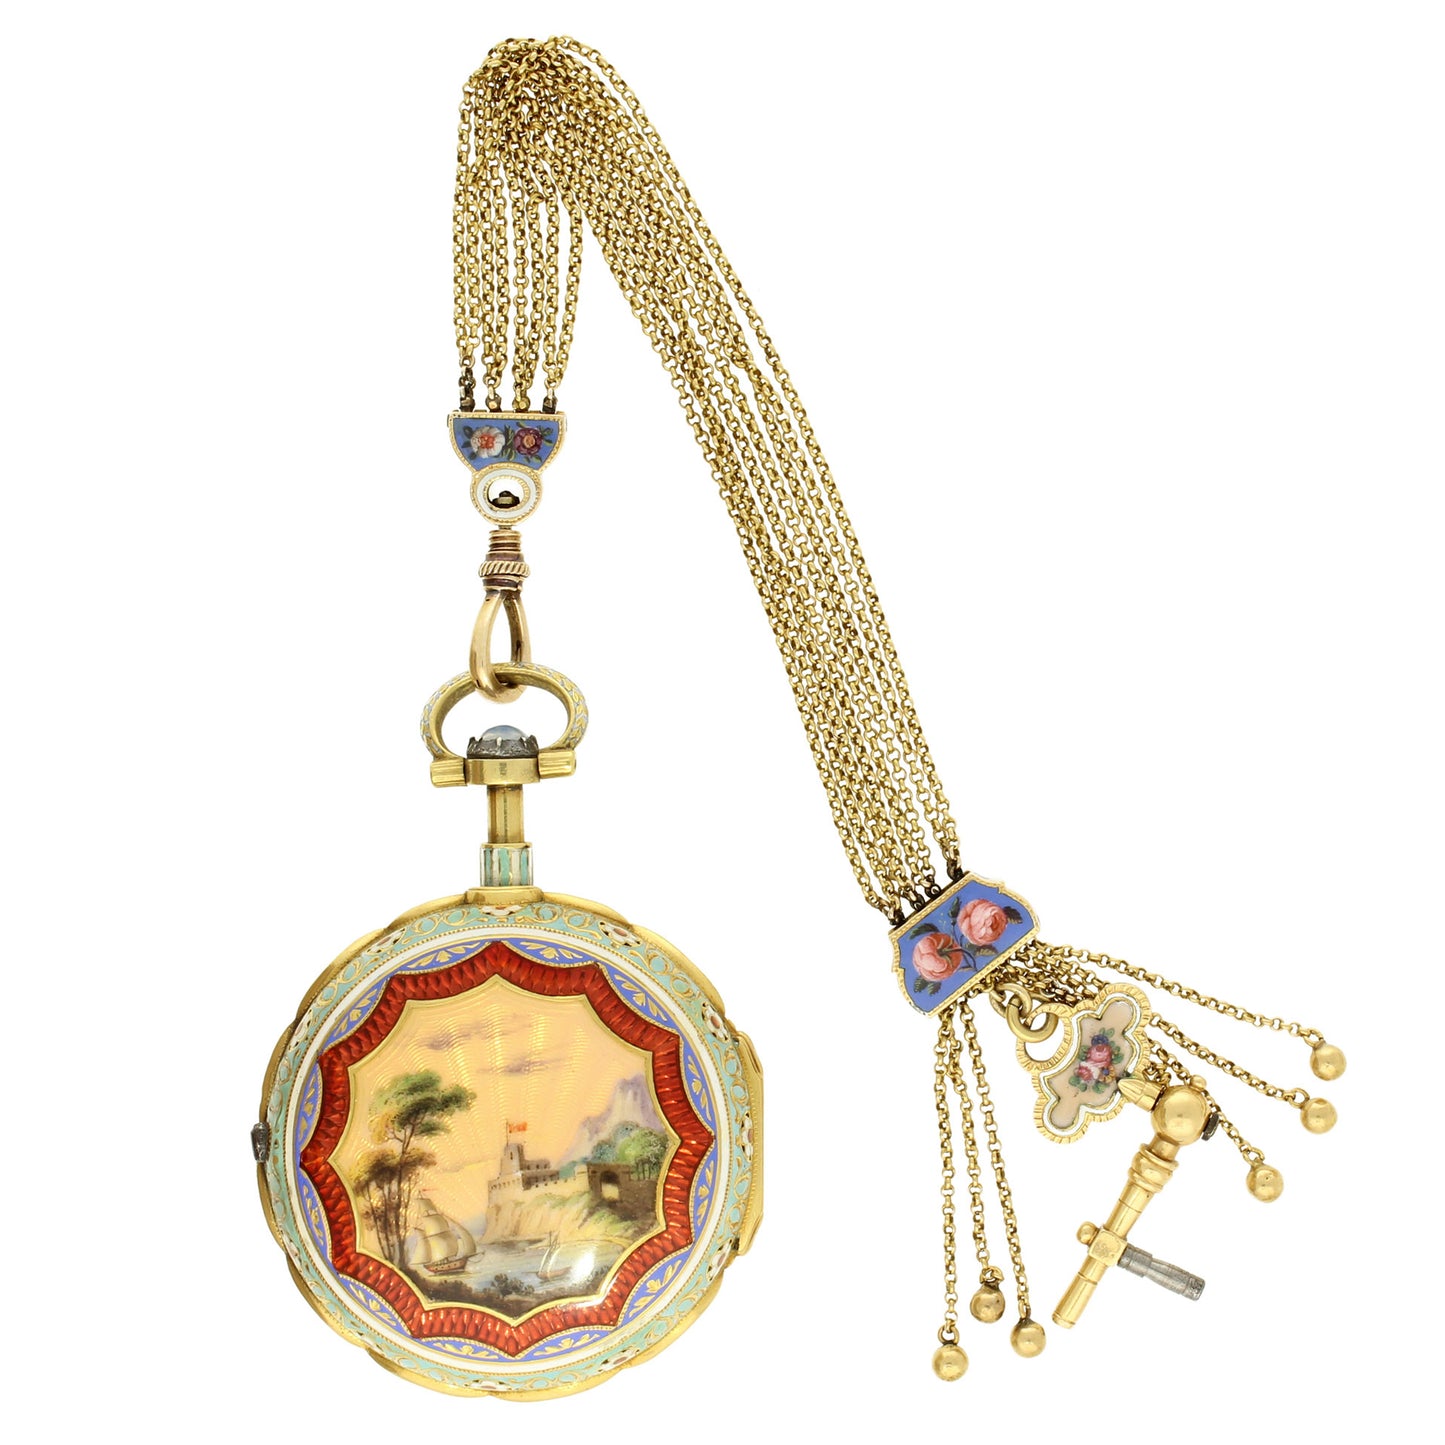 18ct gold and enamel pair case, open face quarter repeating pocket watch, made for the Turkish Market. Made 1818